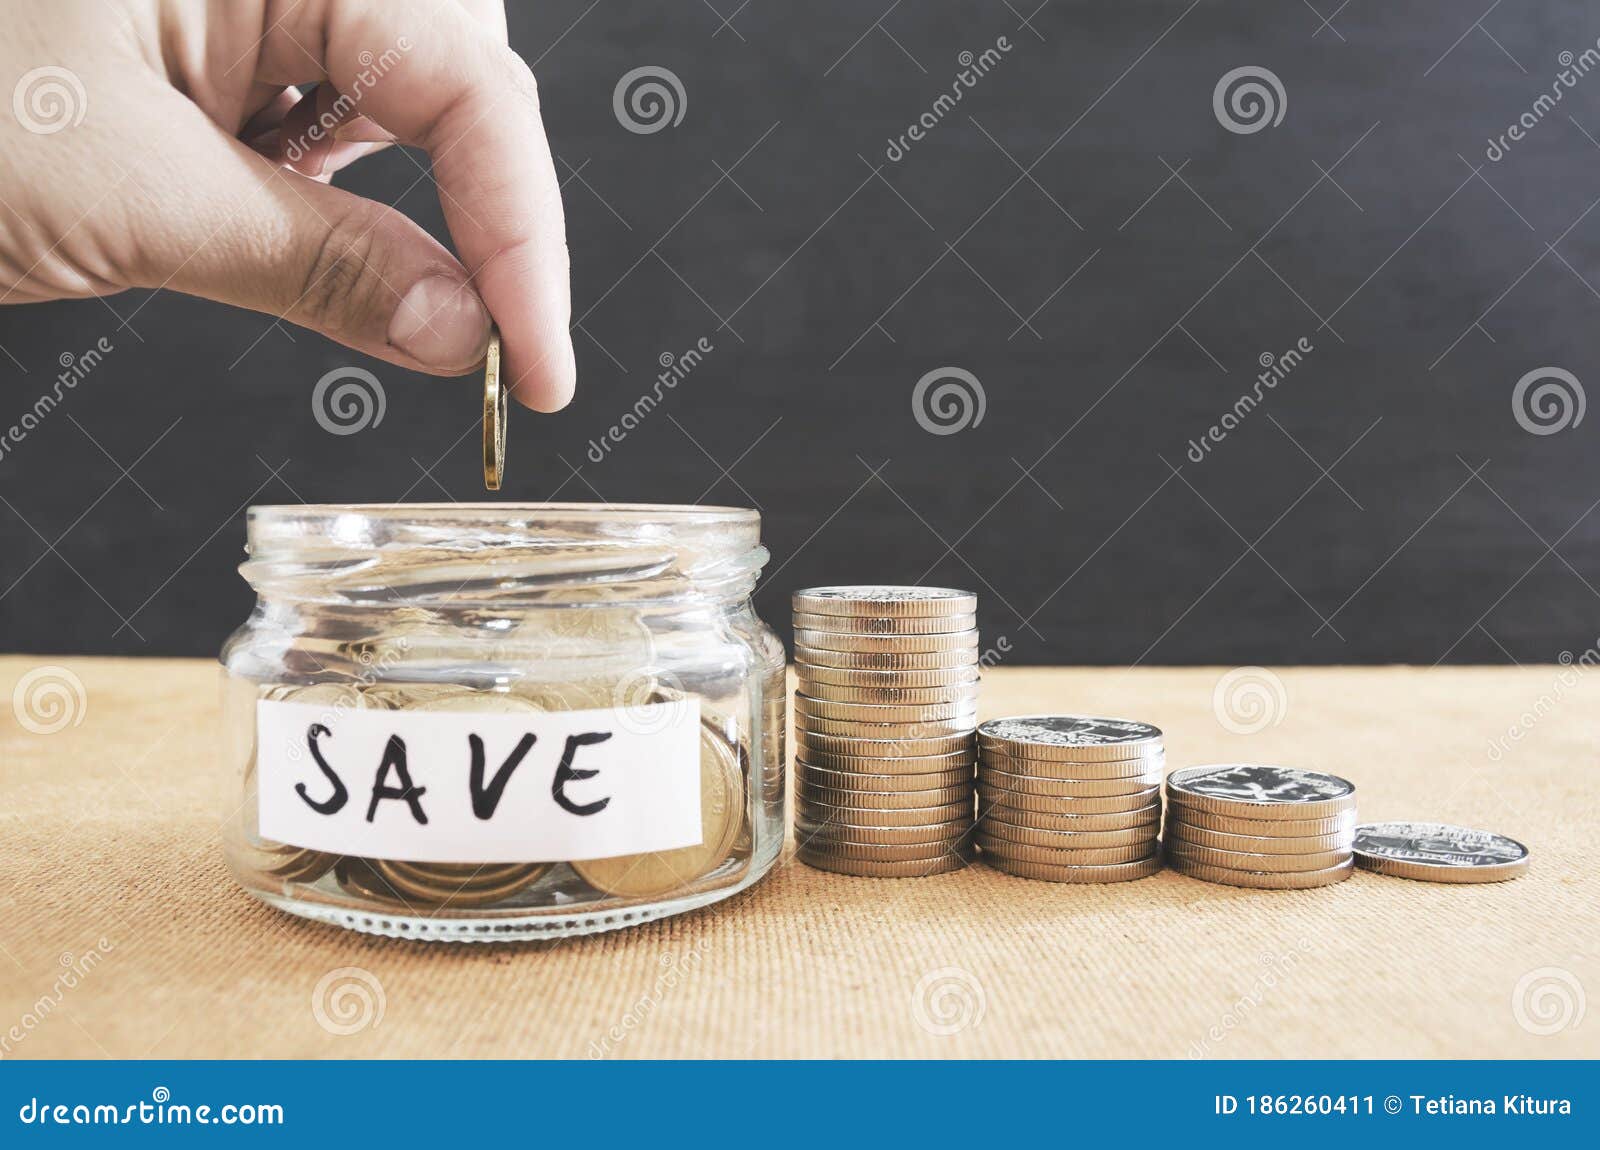 woman hand is putting a coin in a glass bottle and a pile of coins on a brown wooden table,investment business, retirement, finan